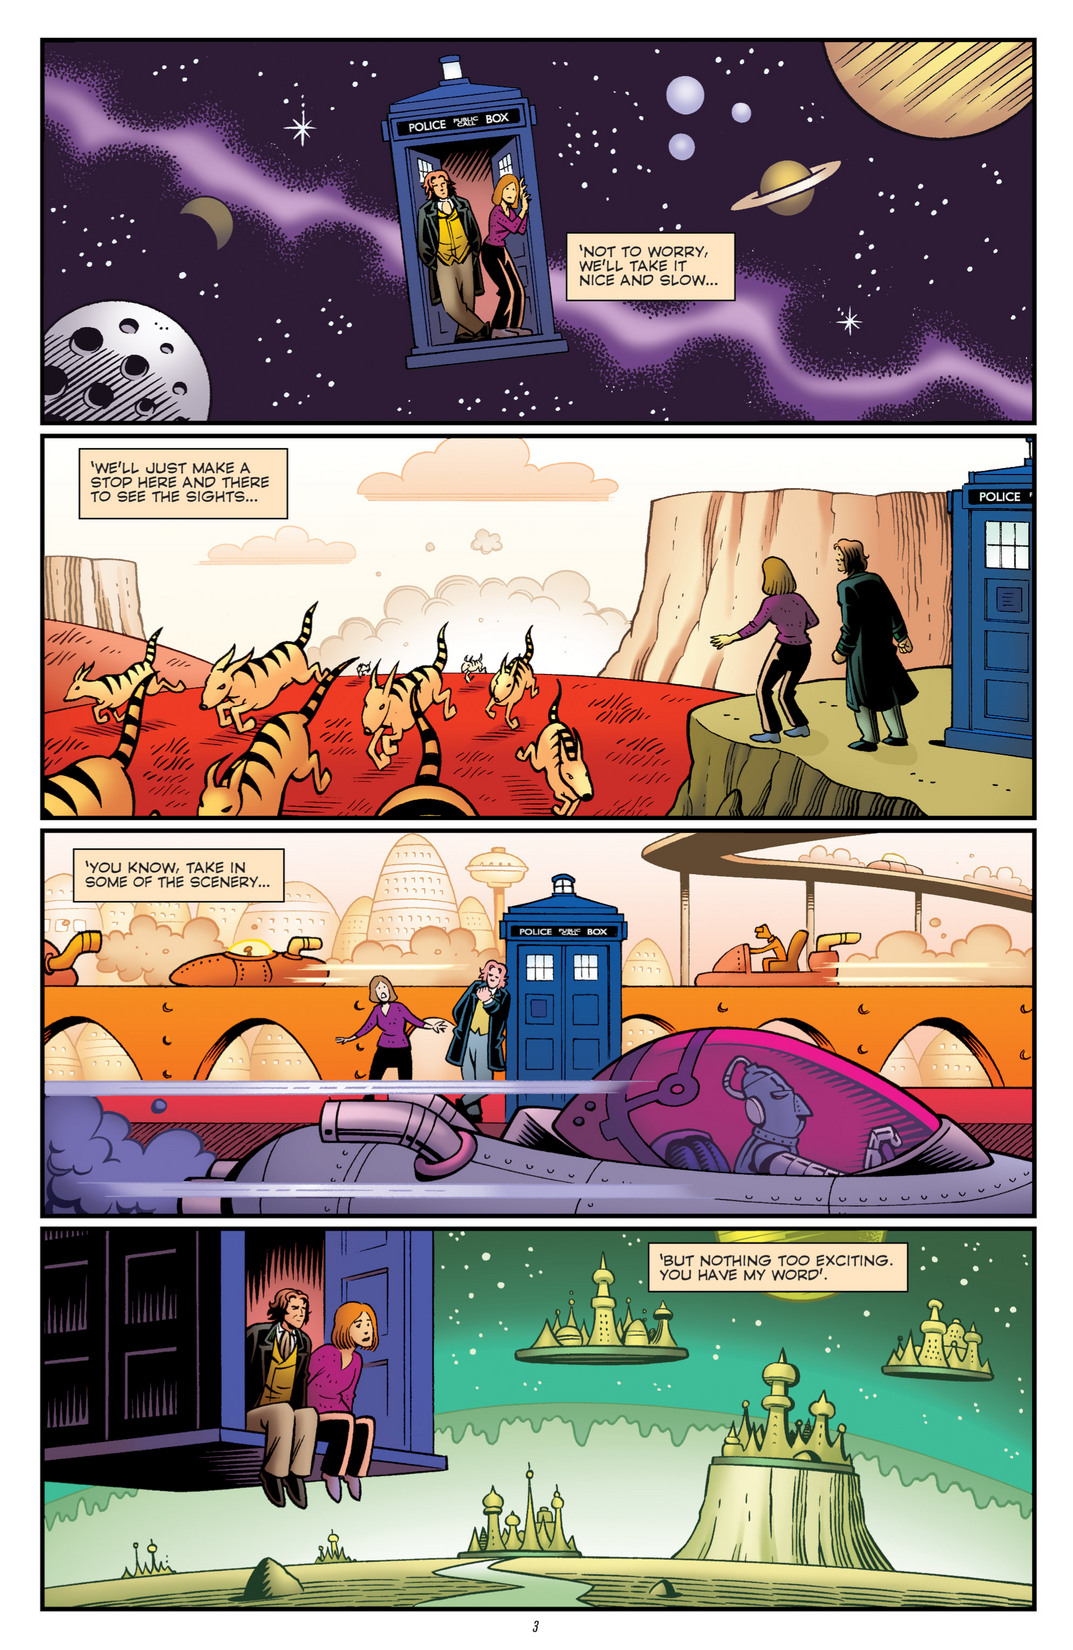 Doctor Who by Scott Tipton